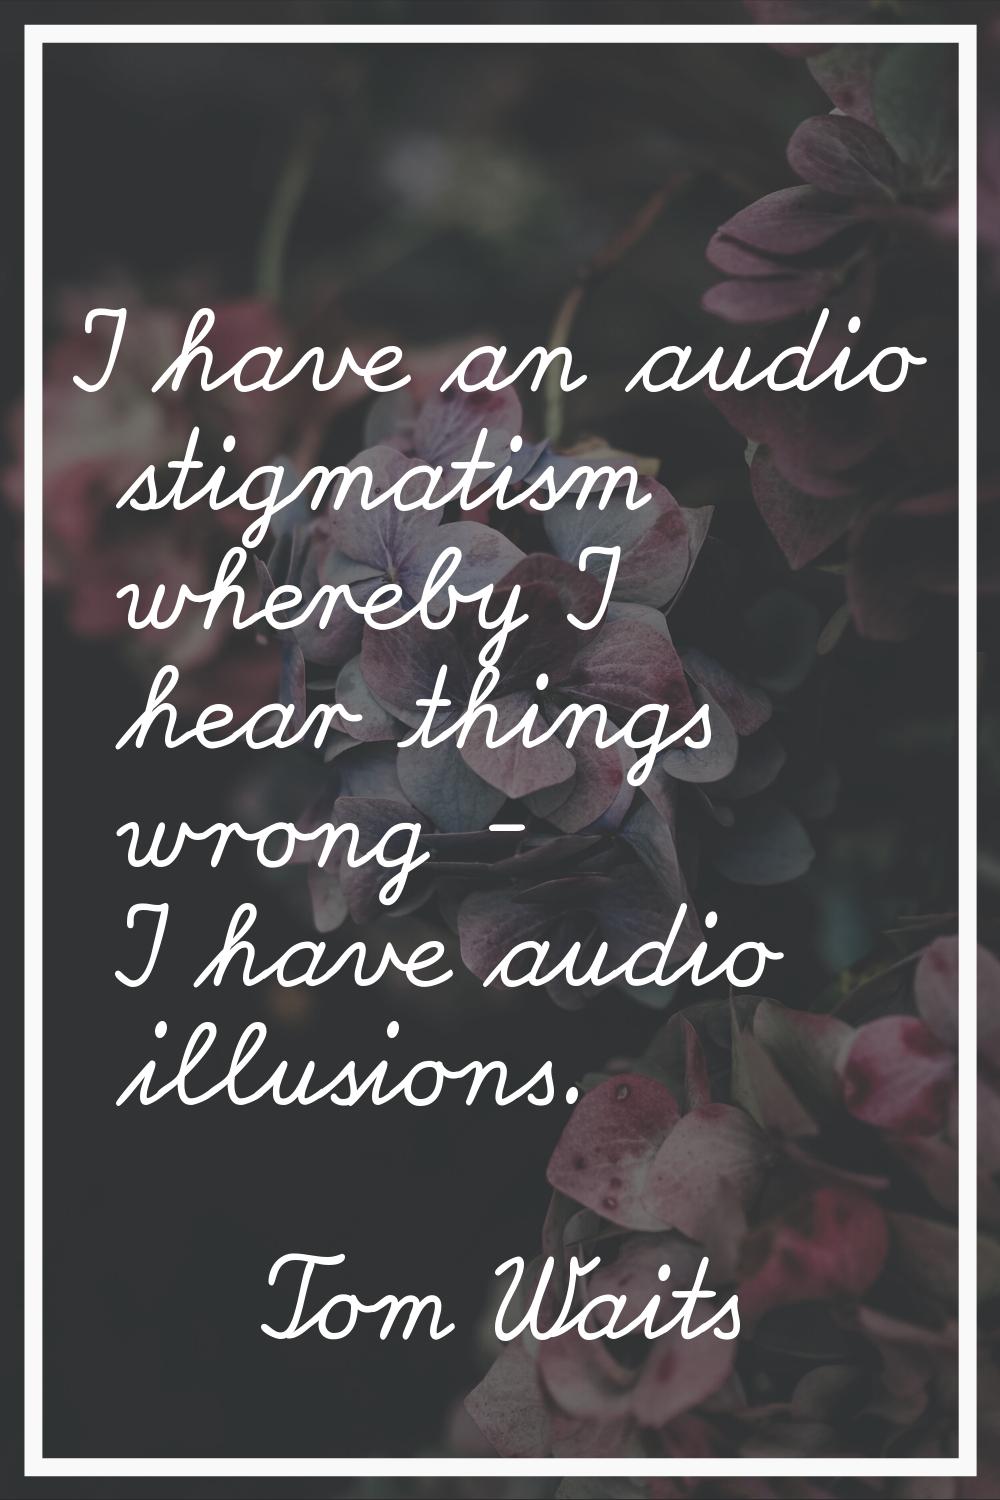 I have an audio stigmatism whereby I hear things wrong - I have audio illusions.